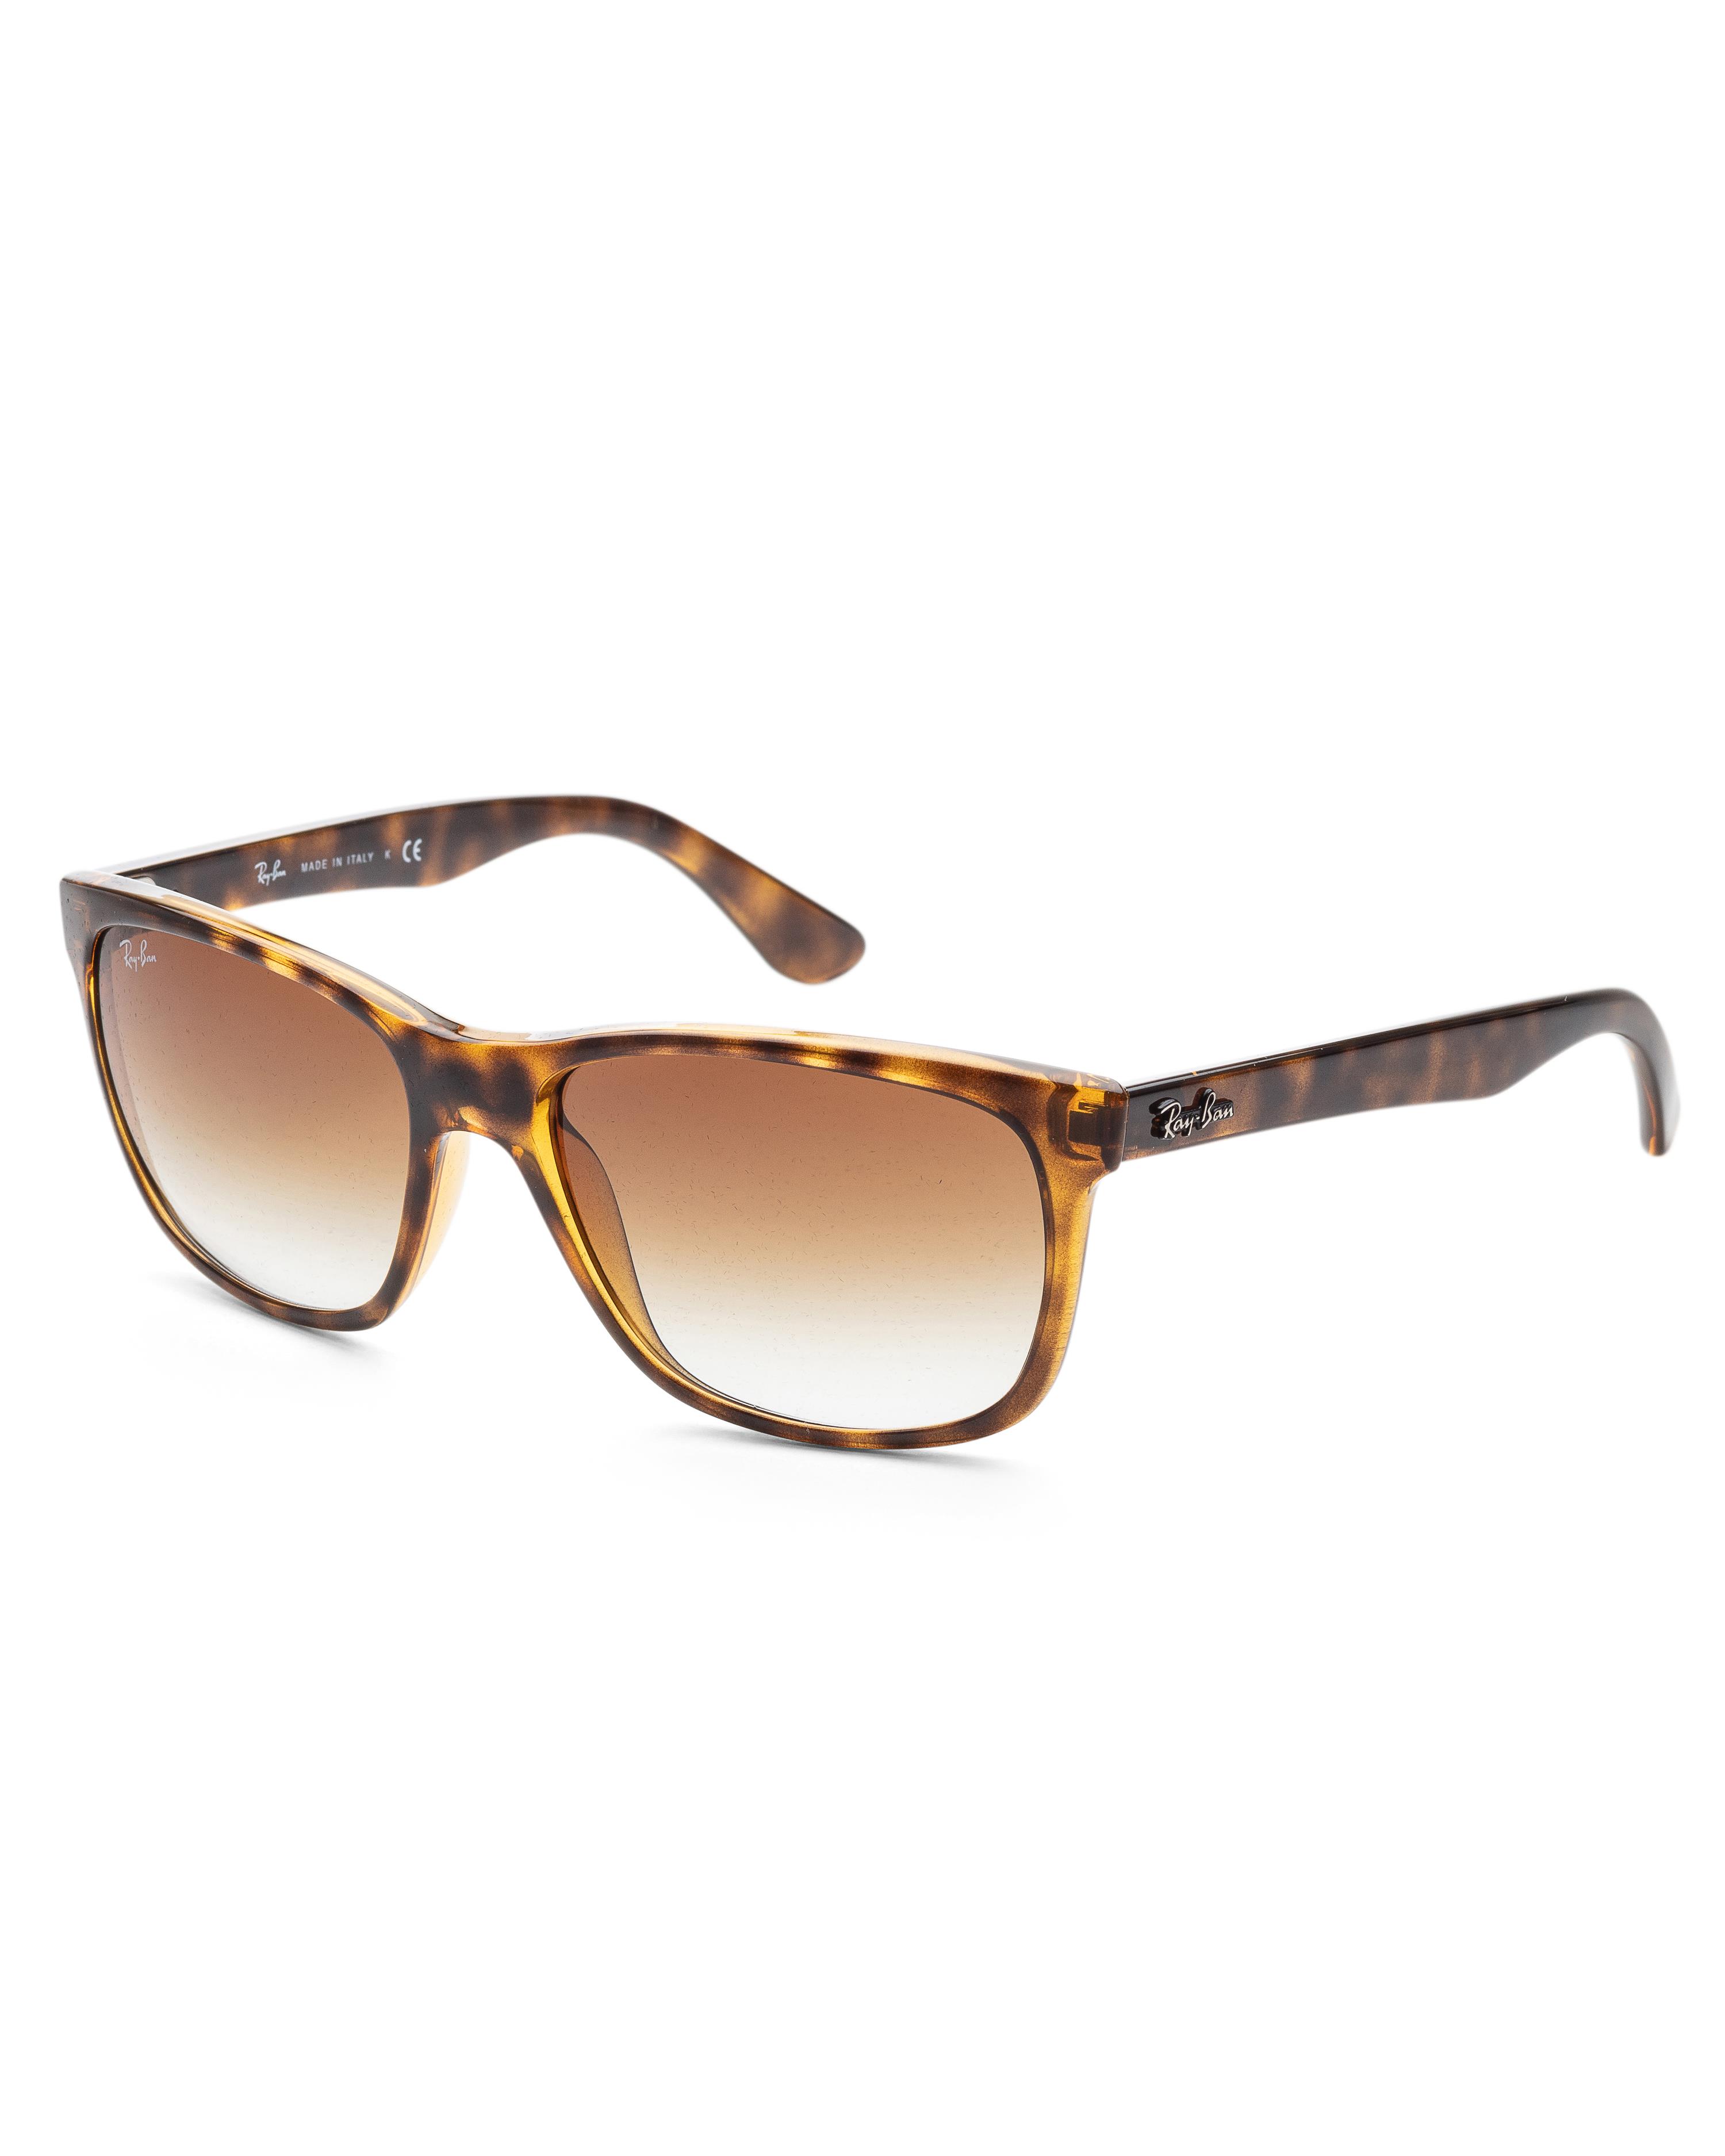 Ray Ban RB 4181 710/51 - Tortoise/Brown Gradient by Ray Ban for Men - 57-16-145 mm Sunglasses - image 1 of 3